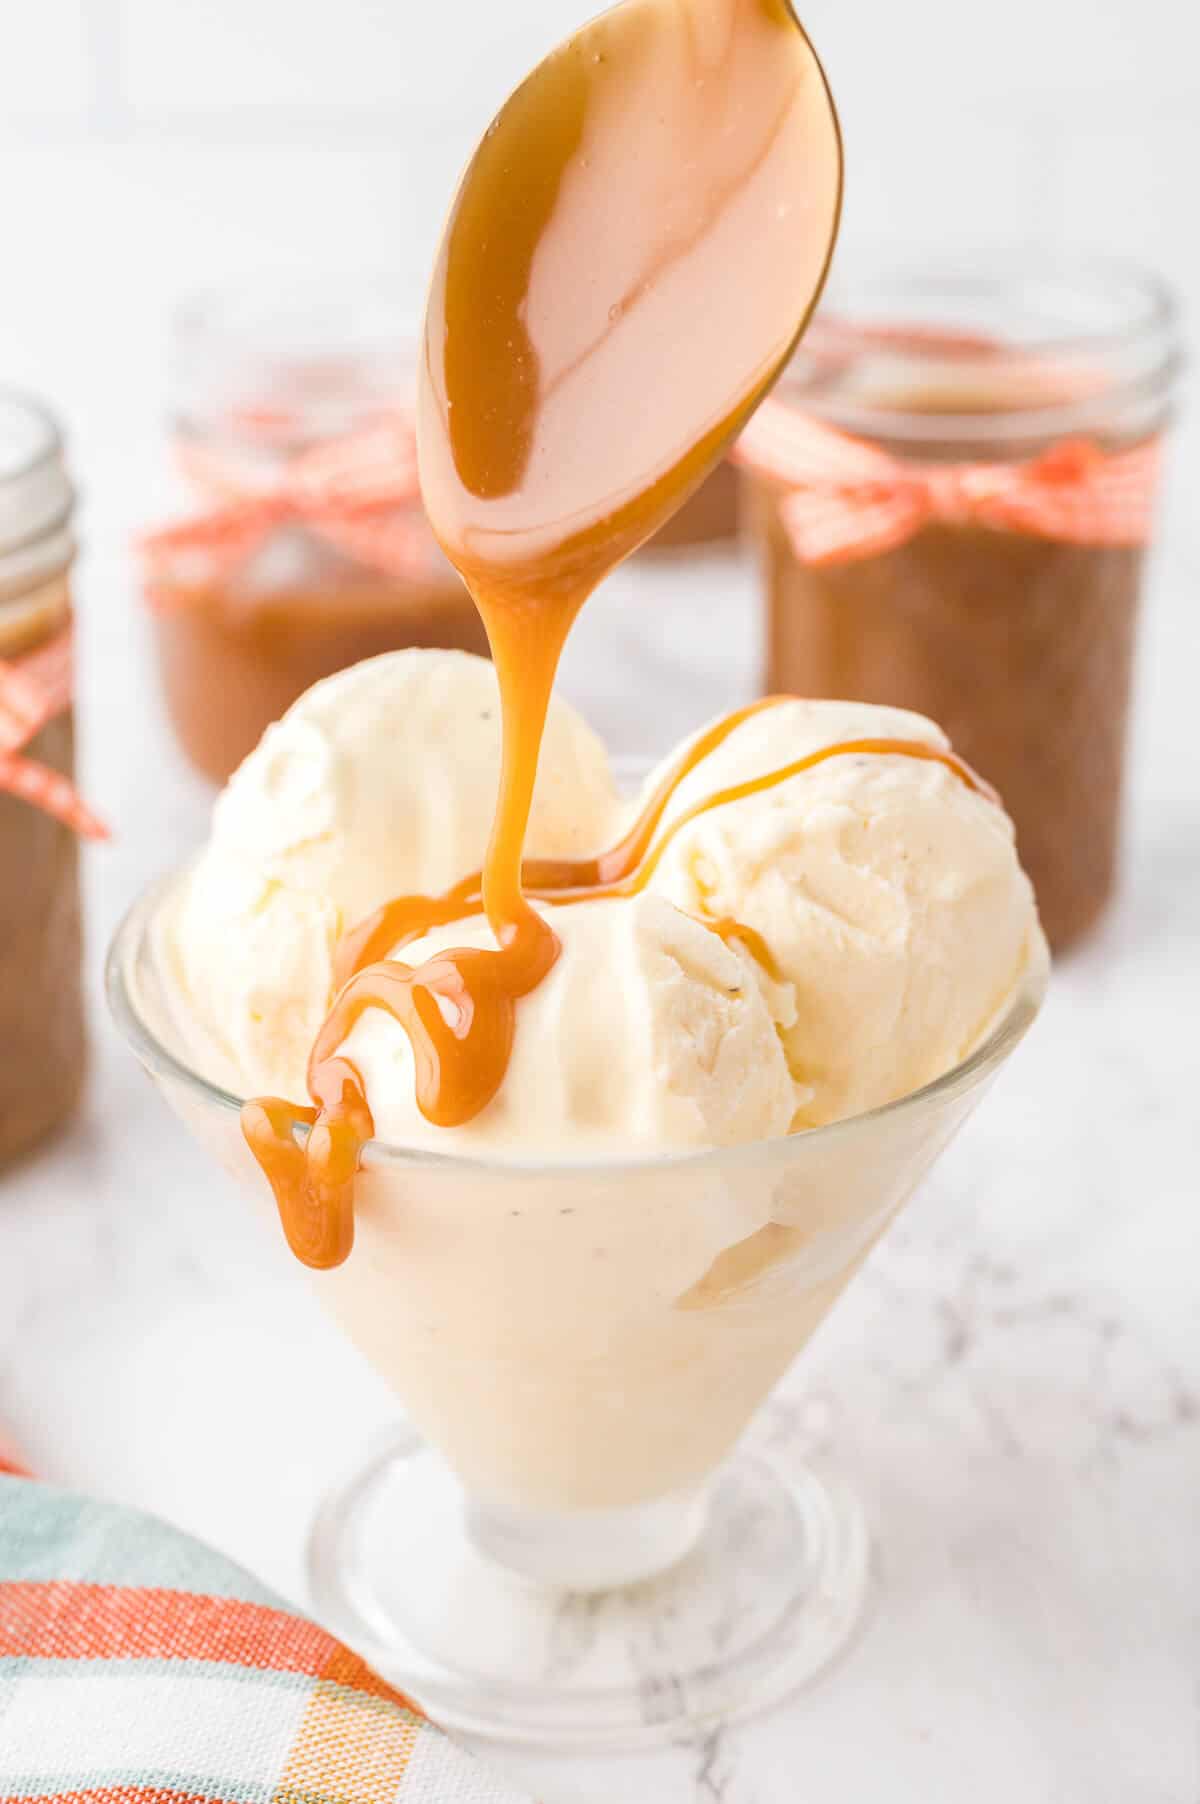 A spoon drizzling butterscotch sauce over vanilla ice cream.